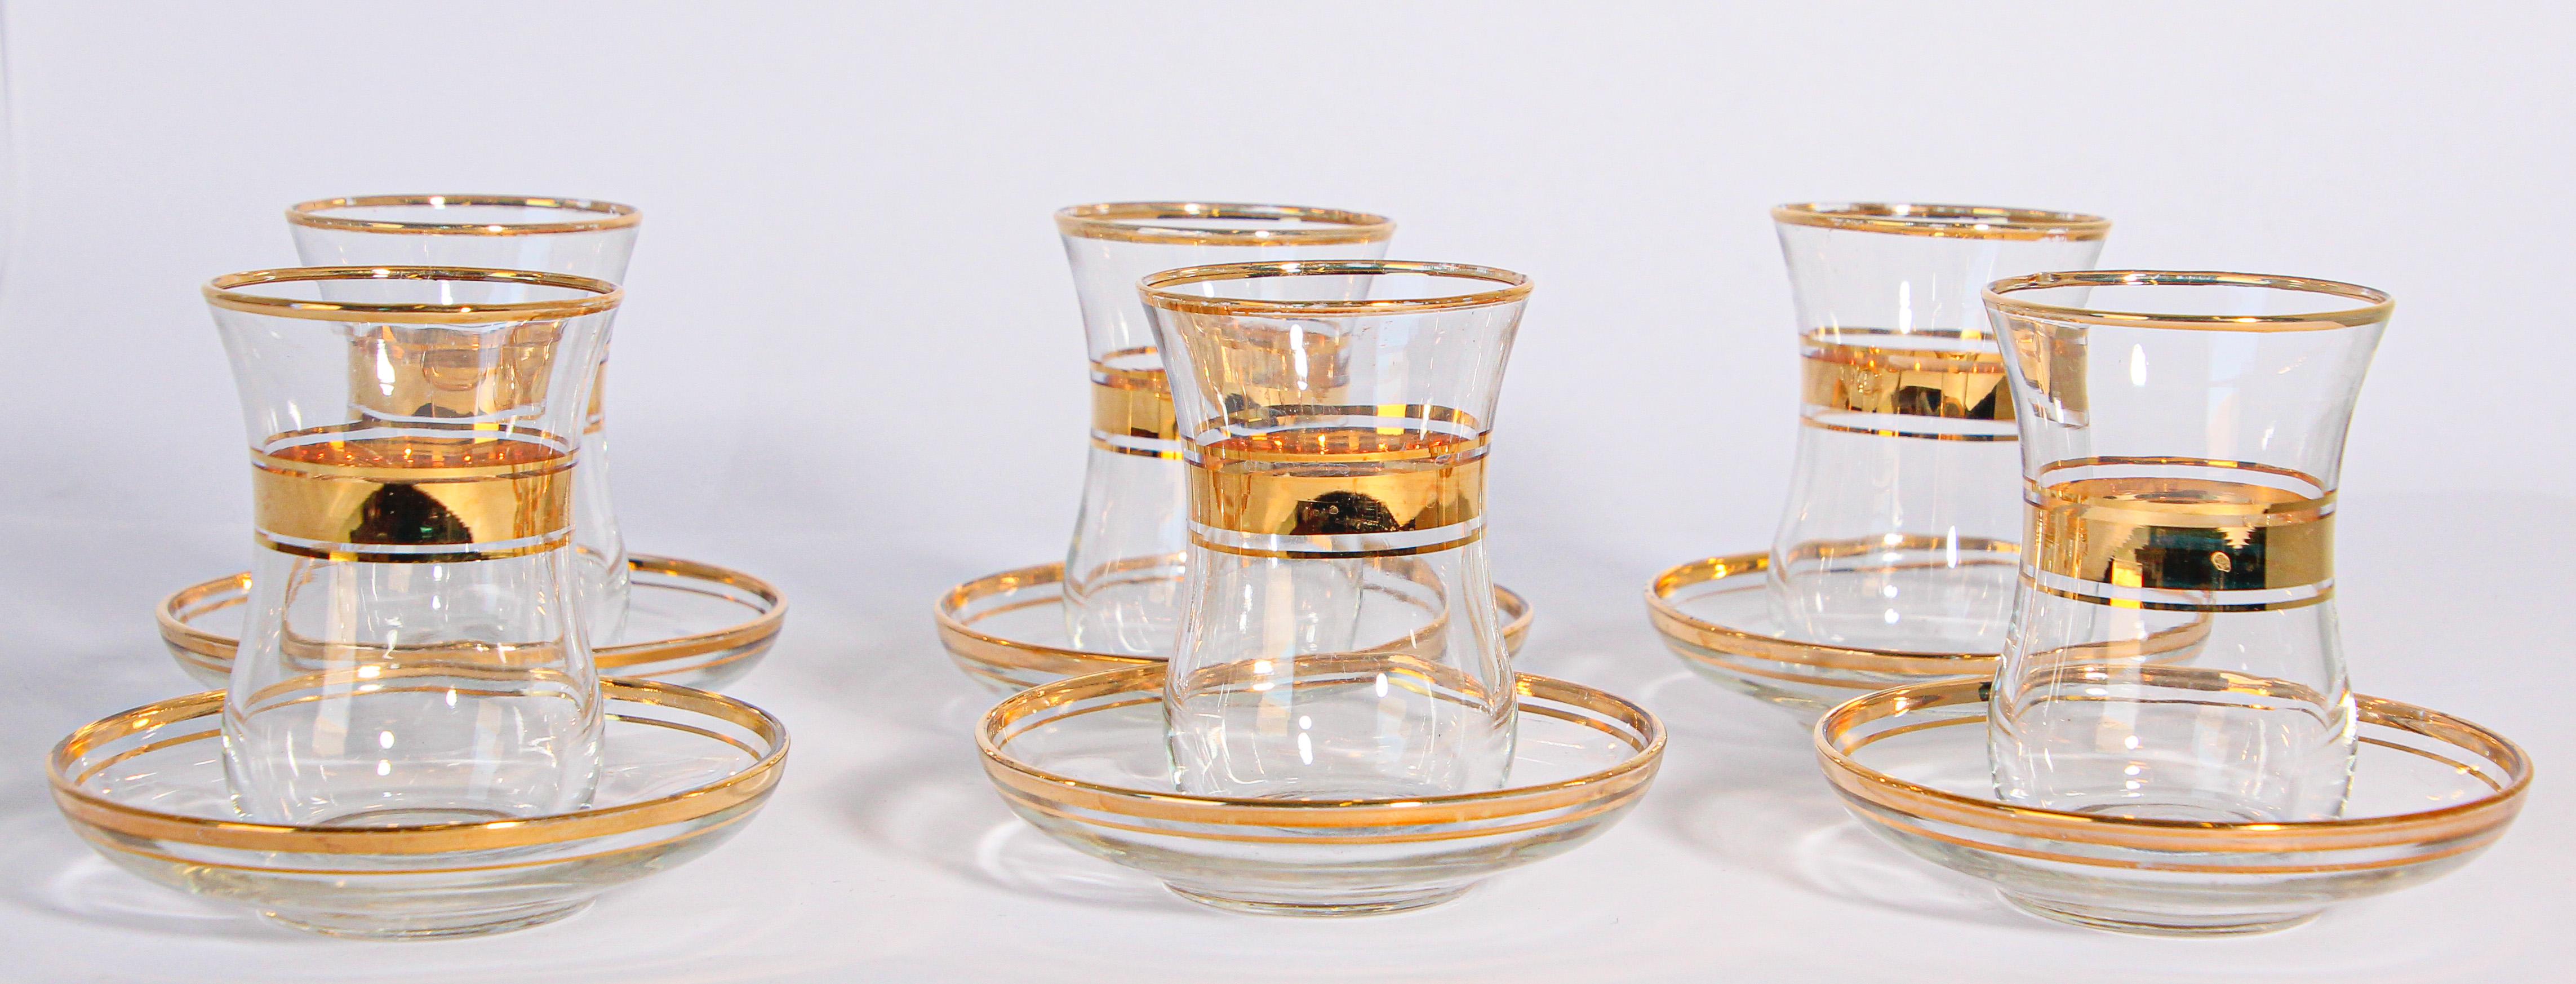 Set of six Turkish tea glasses with gold raised overlay design.
Set of blown glass after dinner cup and saucers featuring raised paste gilt designs.
The shape of the saucers could also be used separately as a small side or sauce dish.
Six cup and